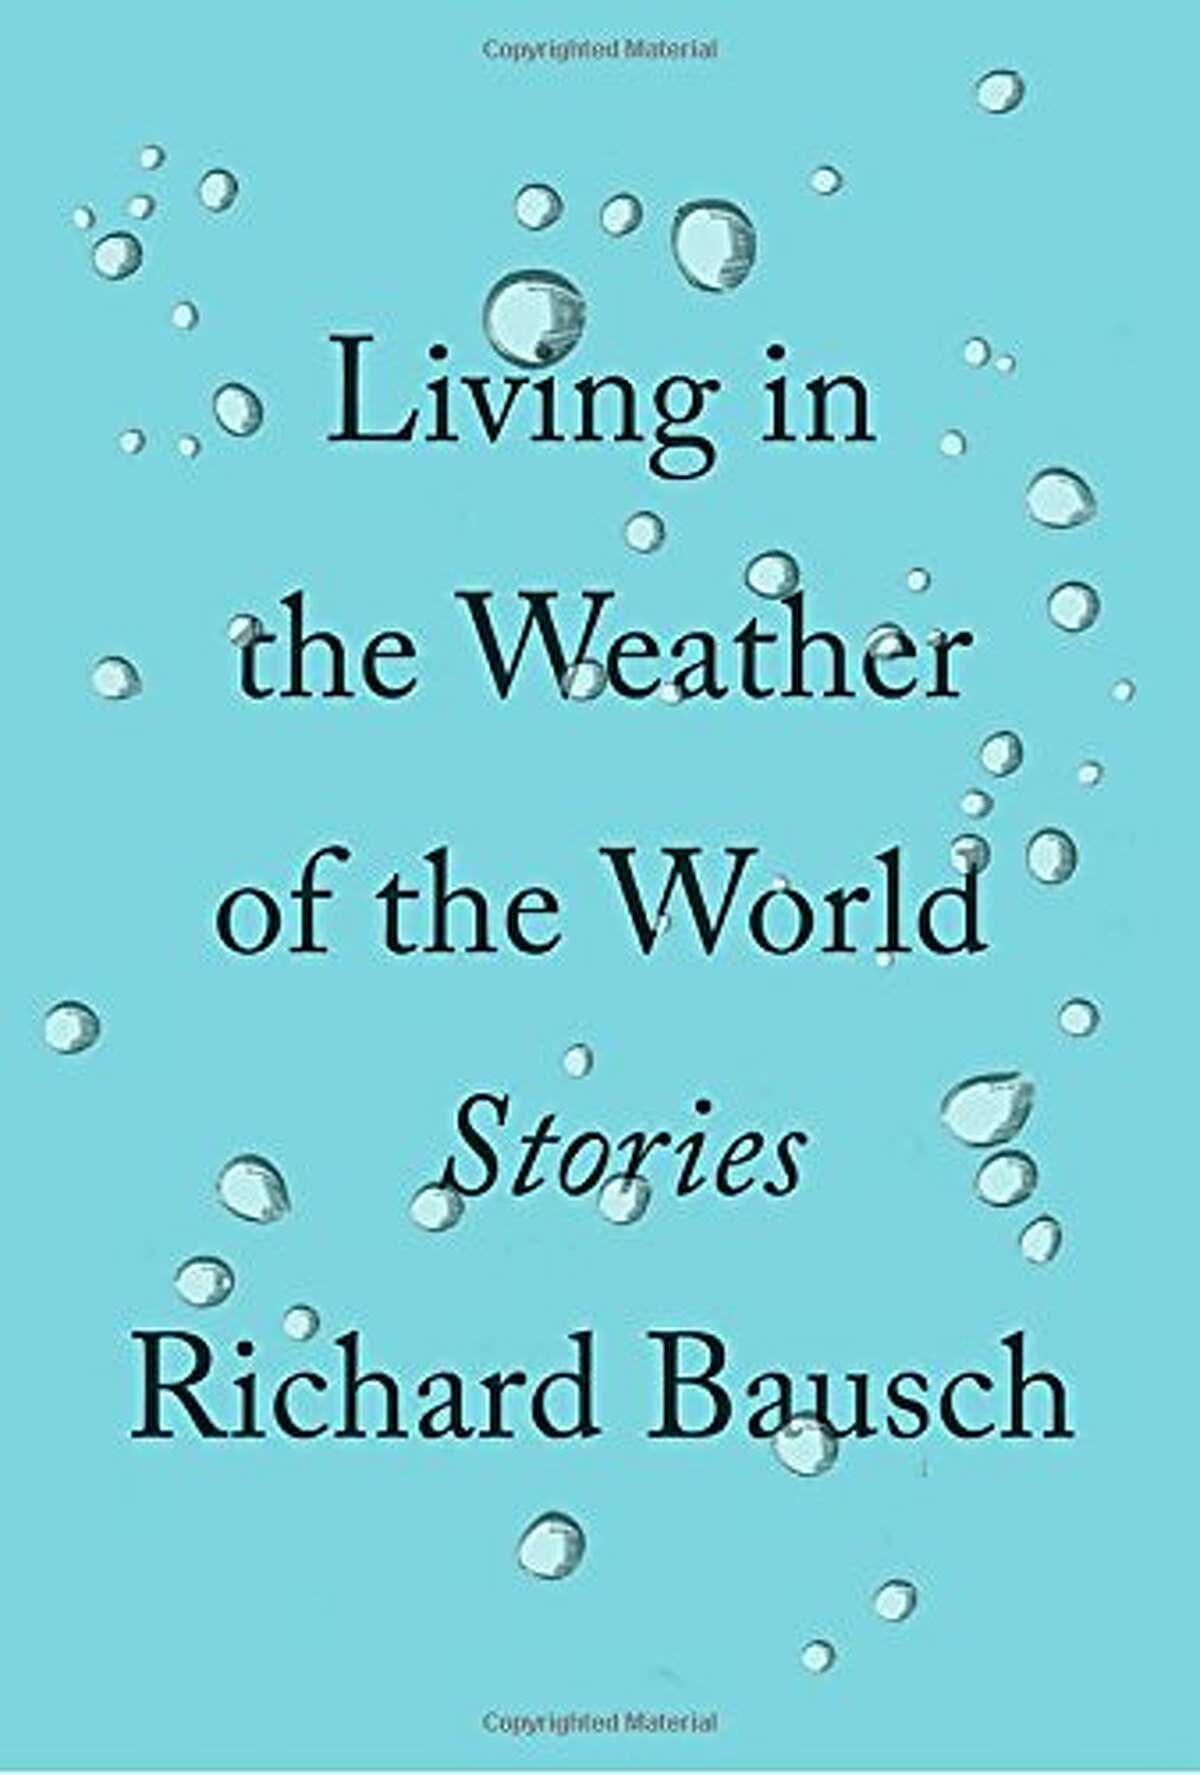 "Living in the Weather of the World" by Richard Bausch